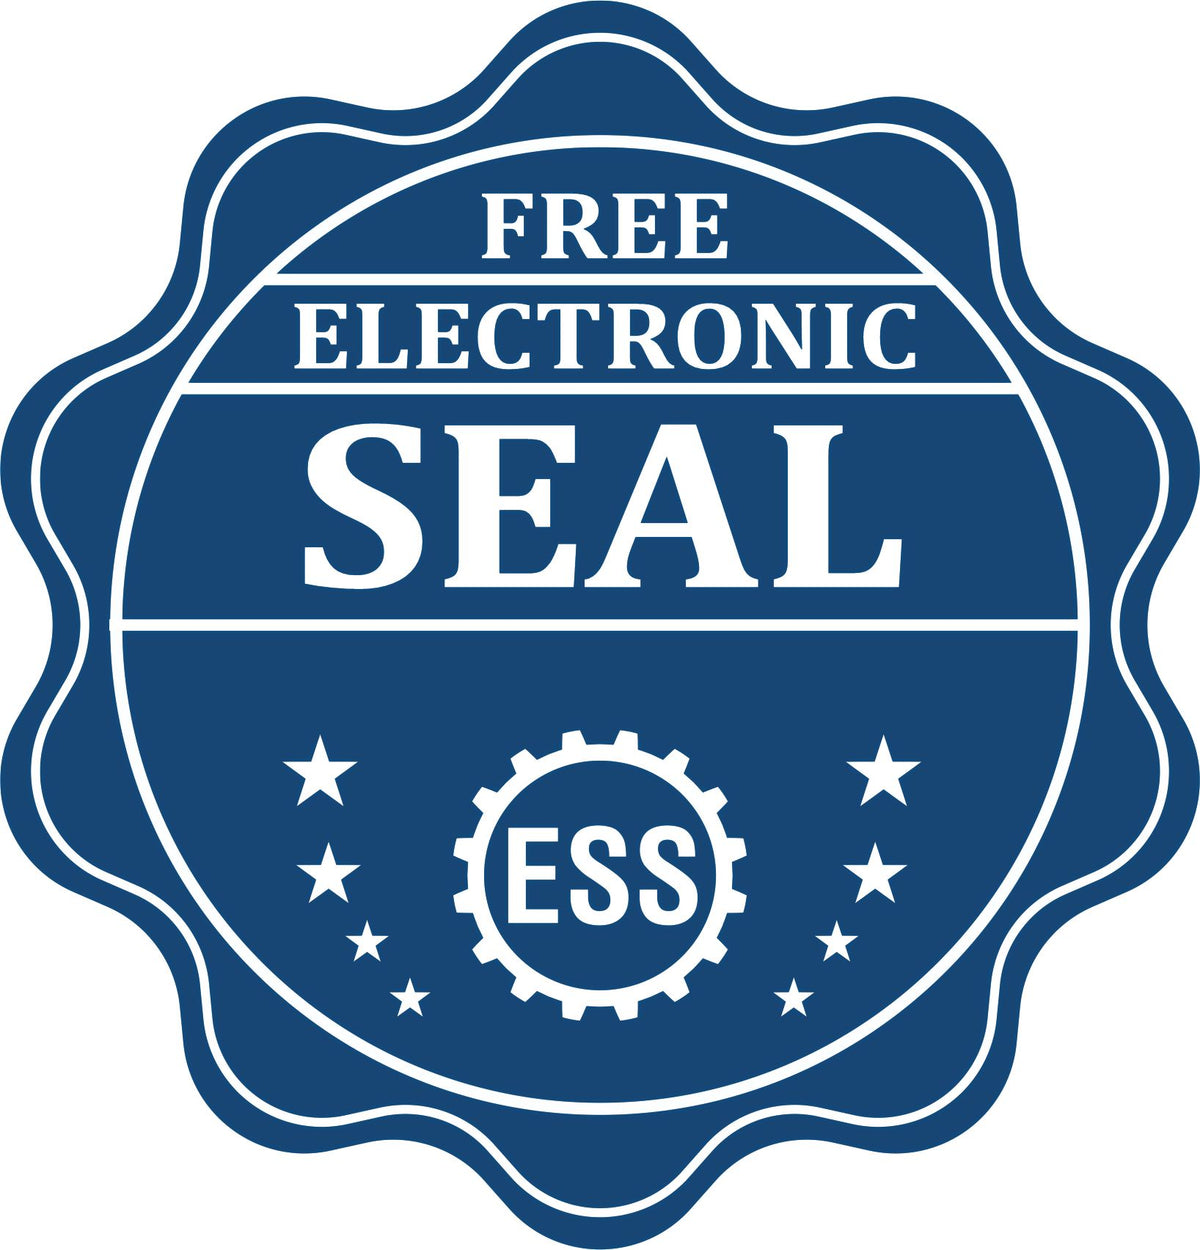 A badge showing a free electronic seal for the PSI New Hampshire Notary Stamp with stars and the ESS gear on the emblem.